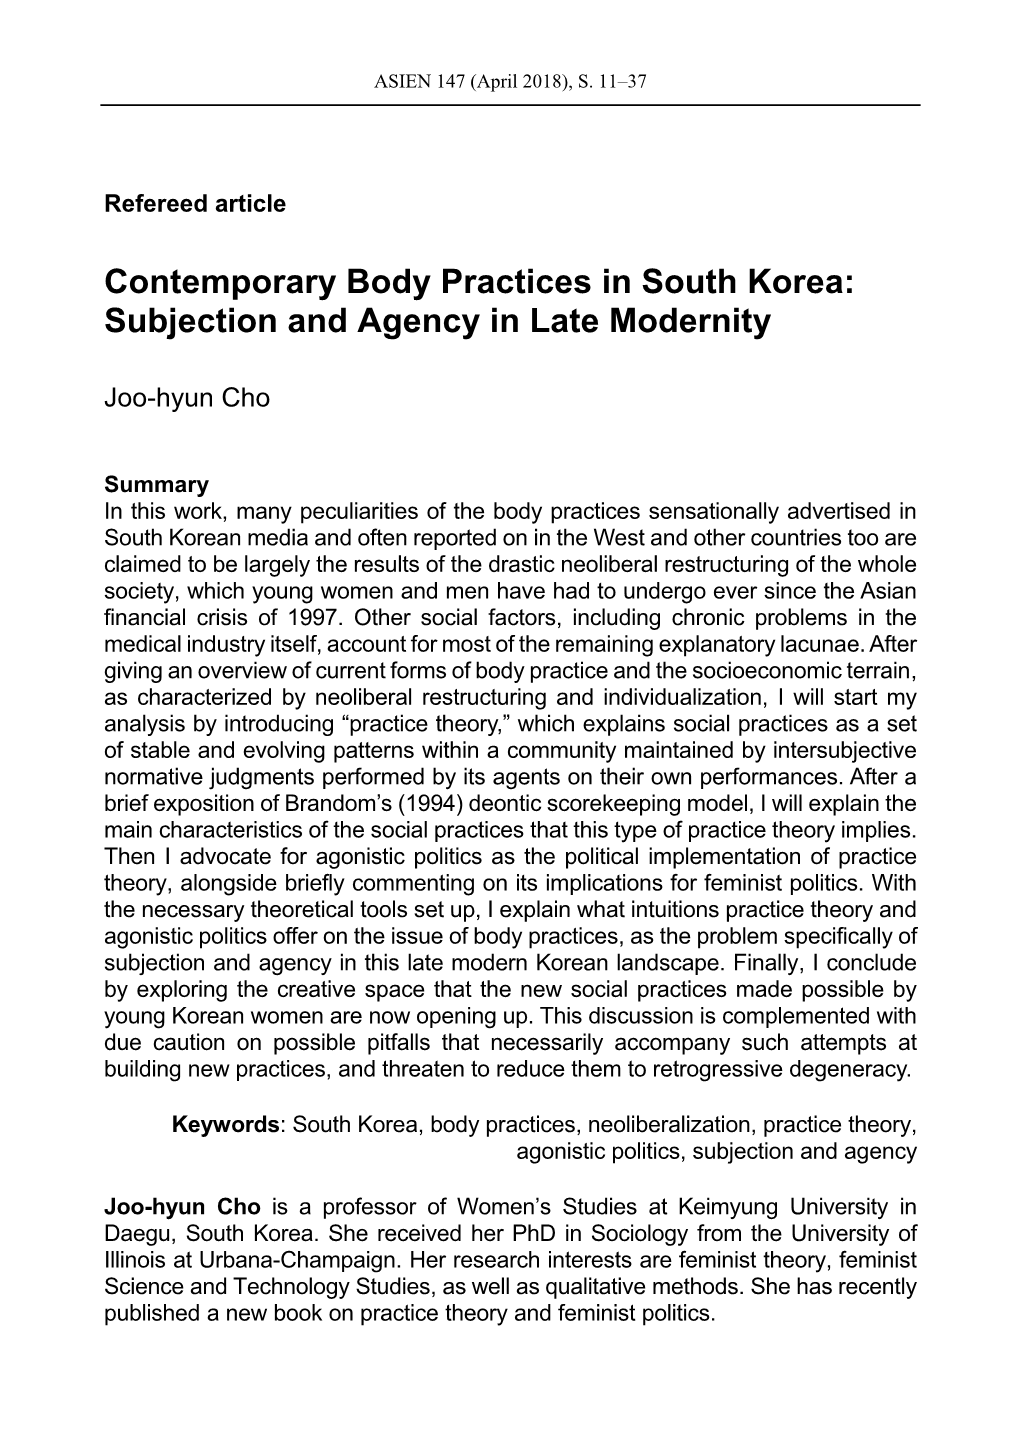 Contemporary Body Practices in South Korea: Subjection and Agency in Late Modernity